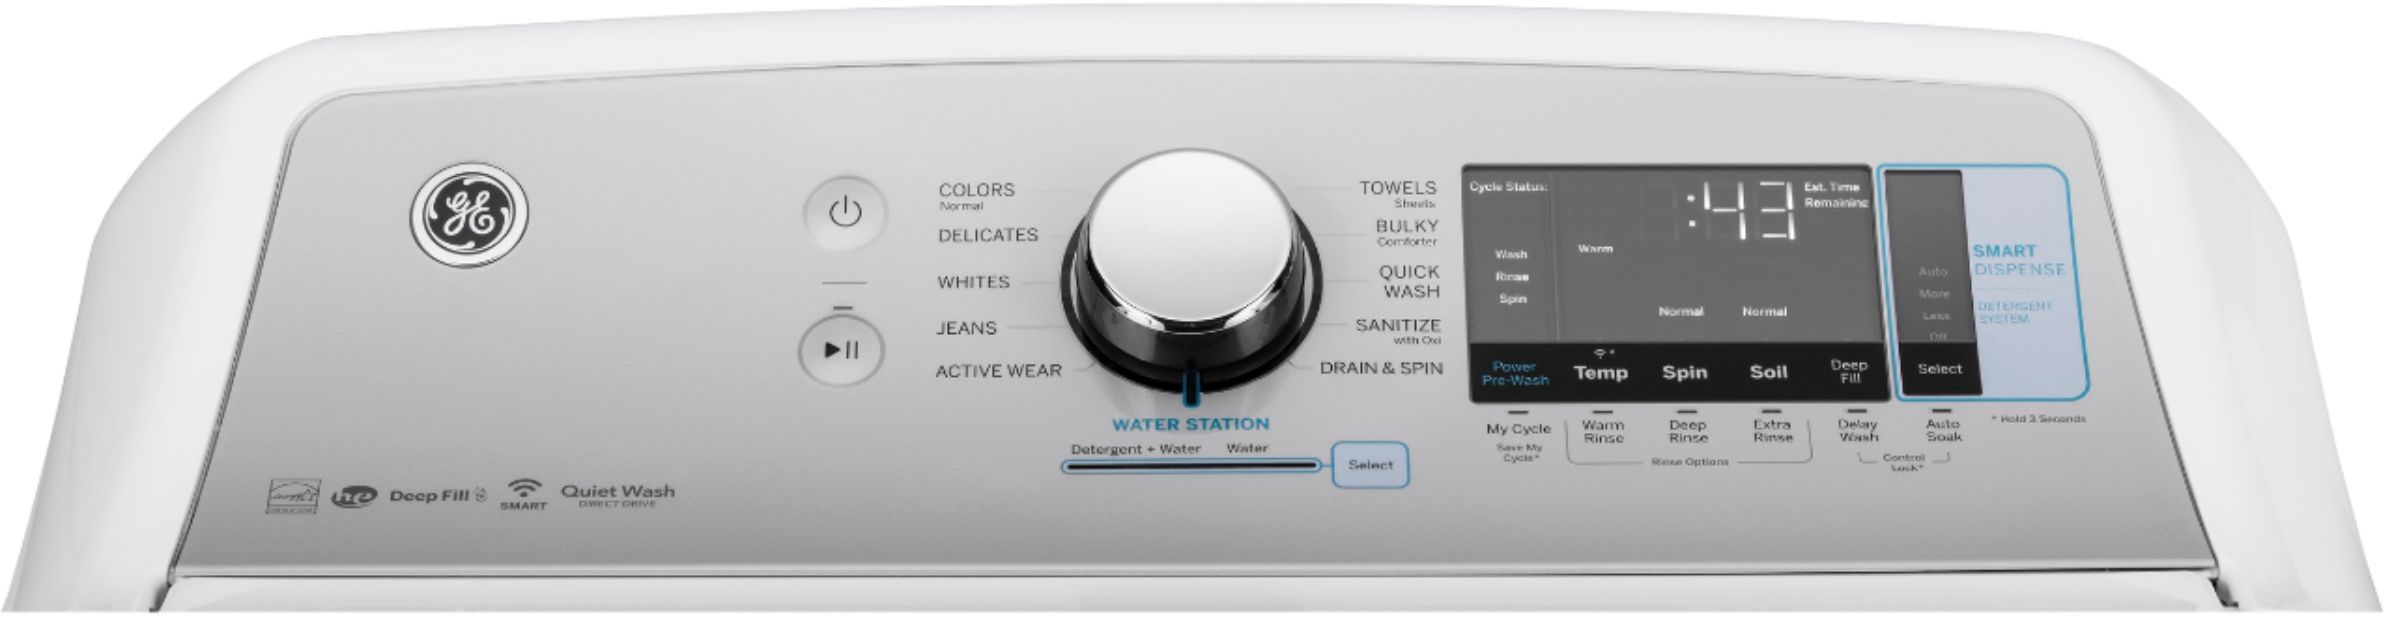 GE 5.2 Cu. Ft. High-Efficiency Top Load Washer White on White 